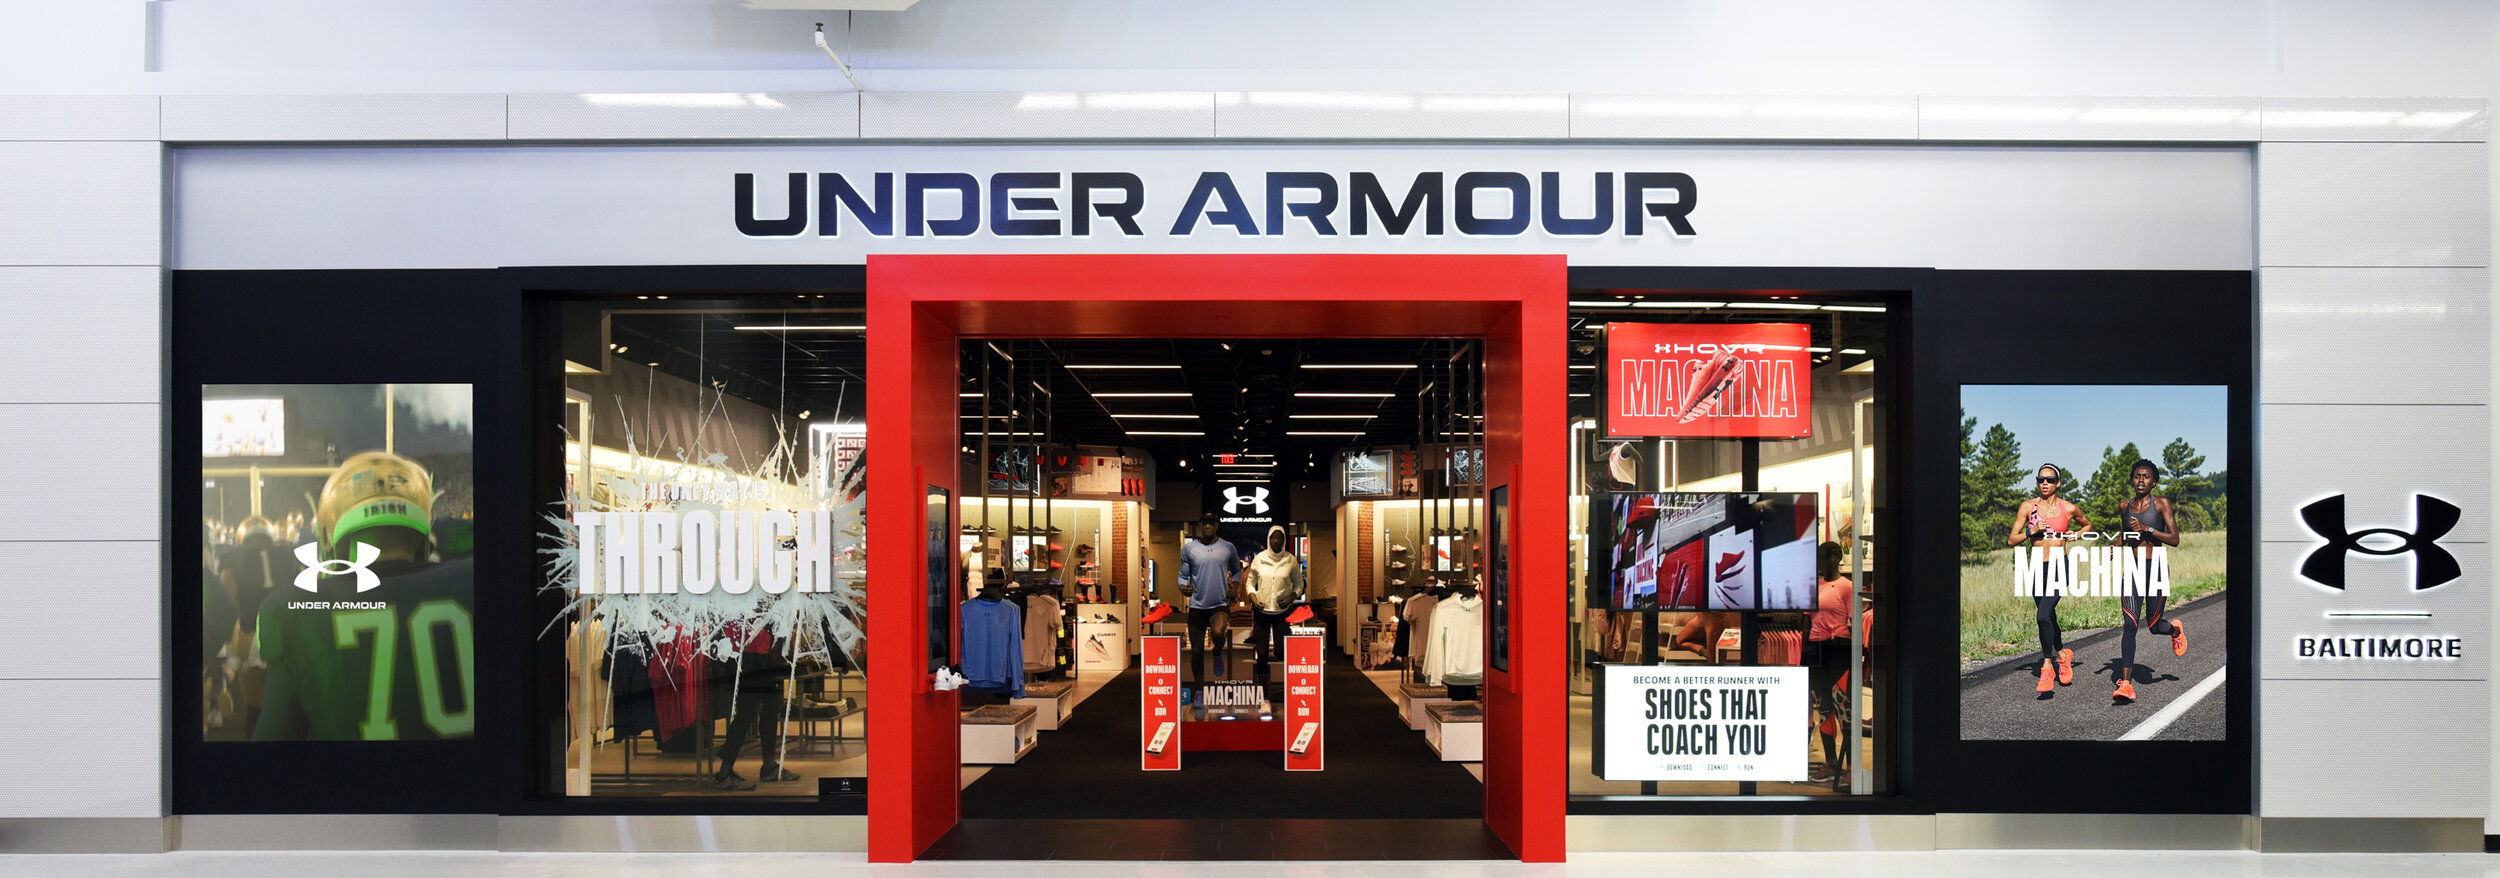 Under Armour | Brand City Concept — Nathan Grundhauser direction